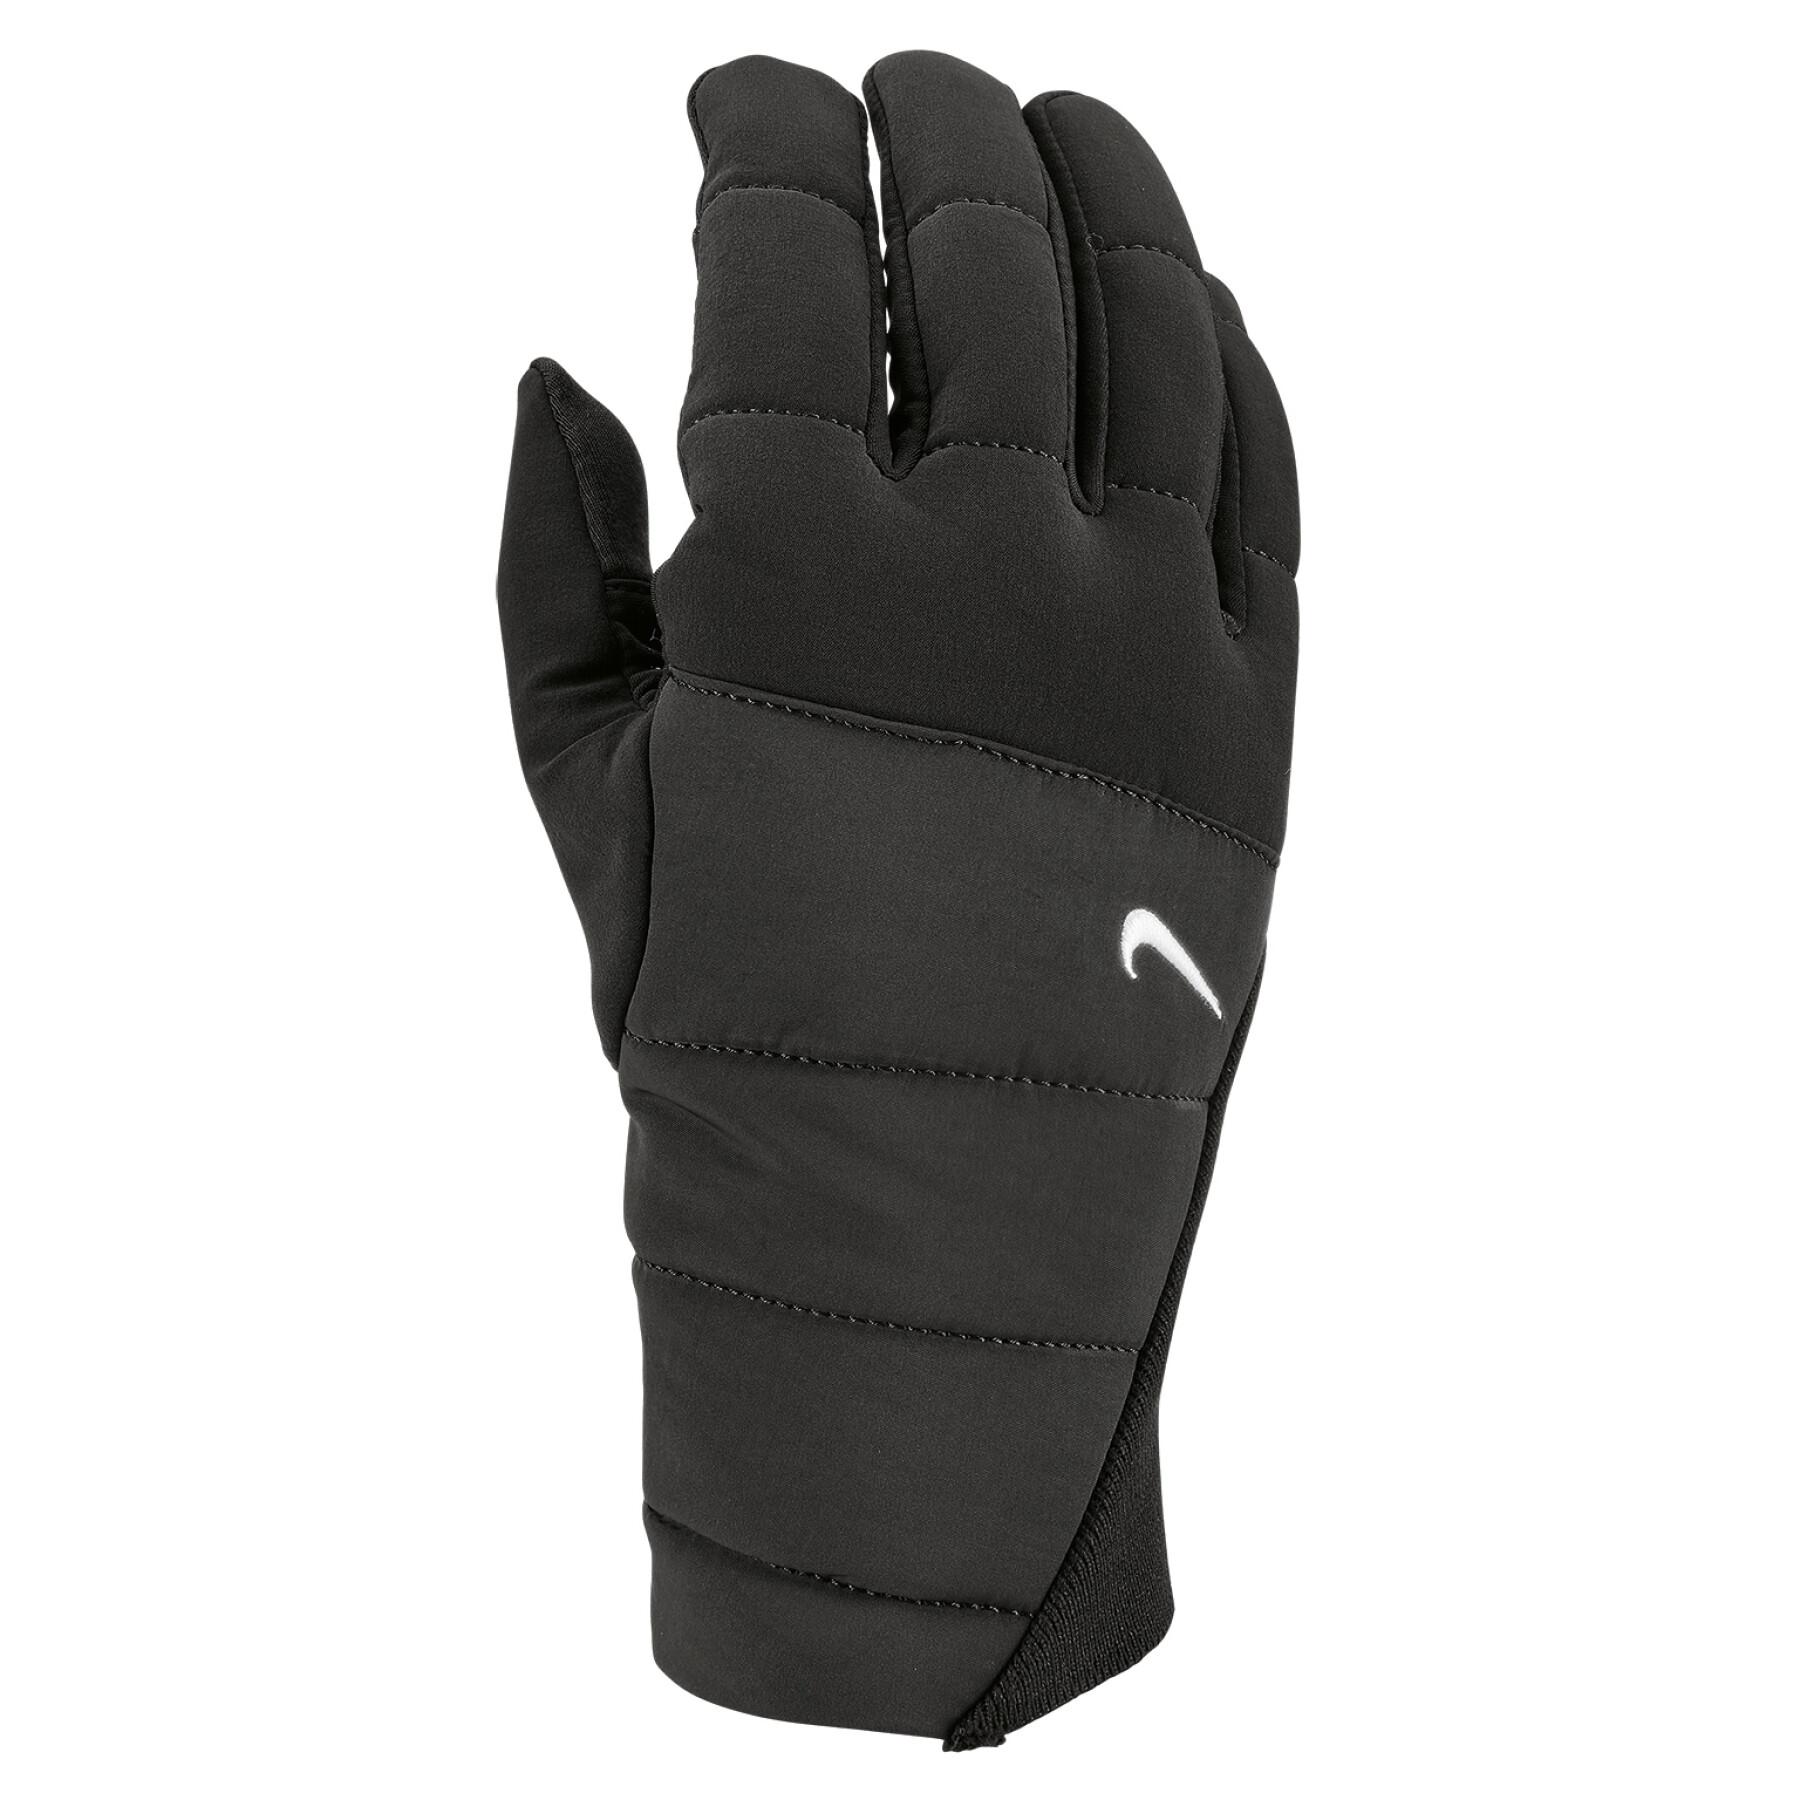 Gloves Nike Quilted TG - Gloves - Textile - Equipment